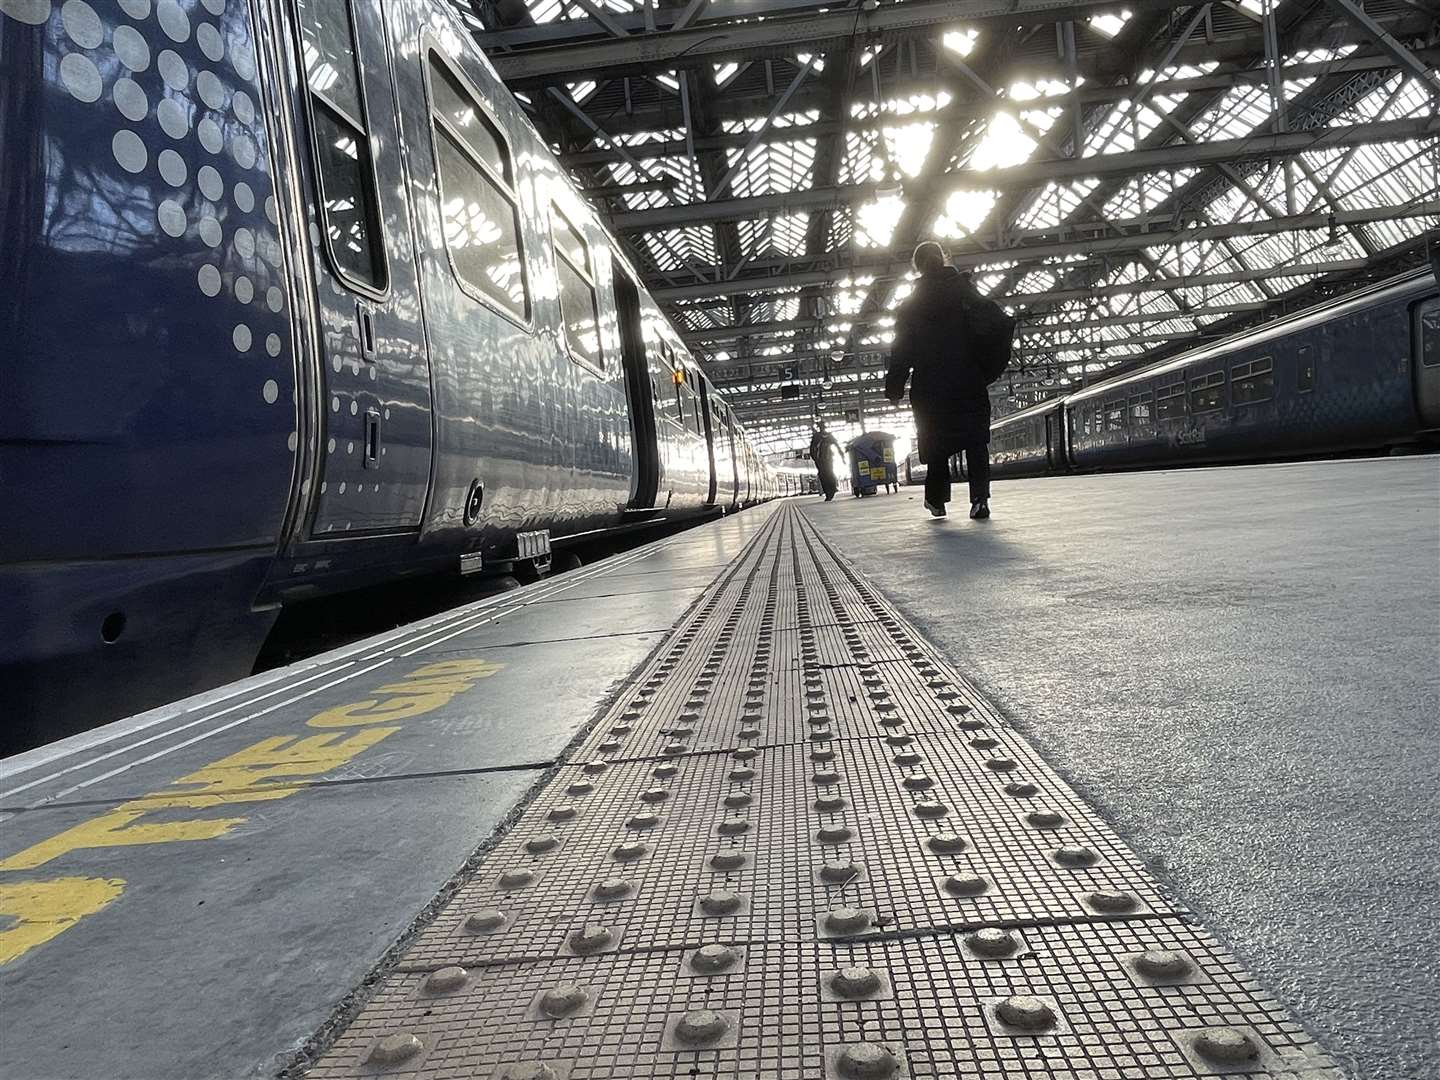 The tactile paving will be installed across all of Scotland's railway.